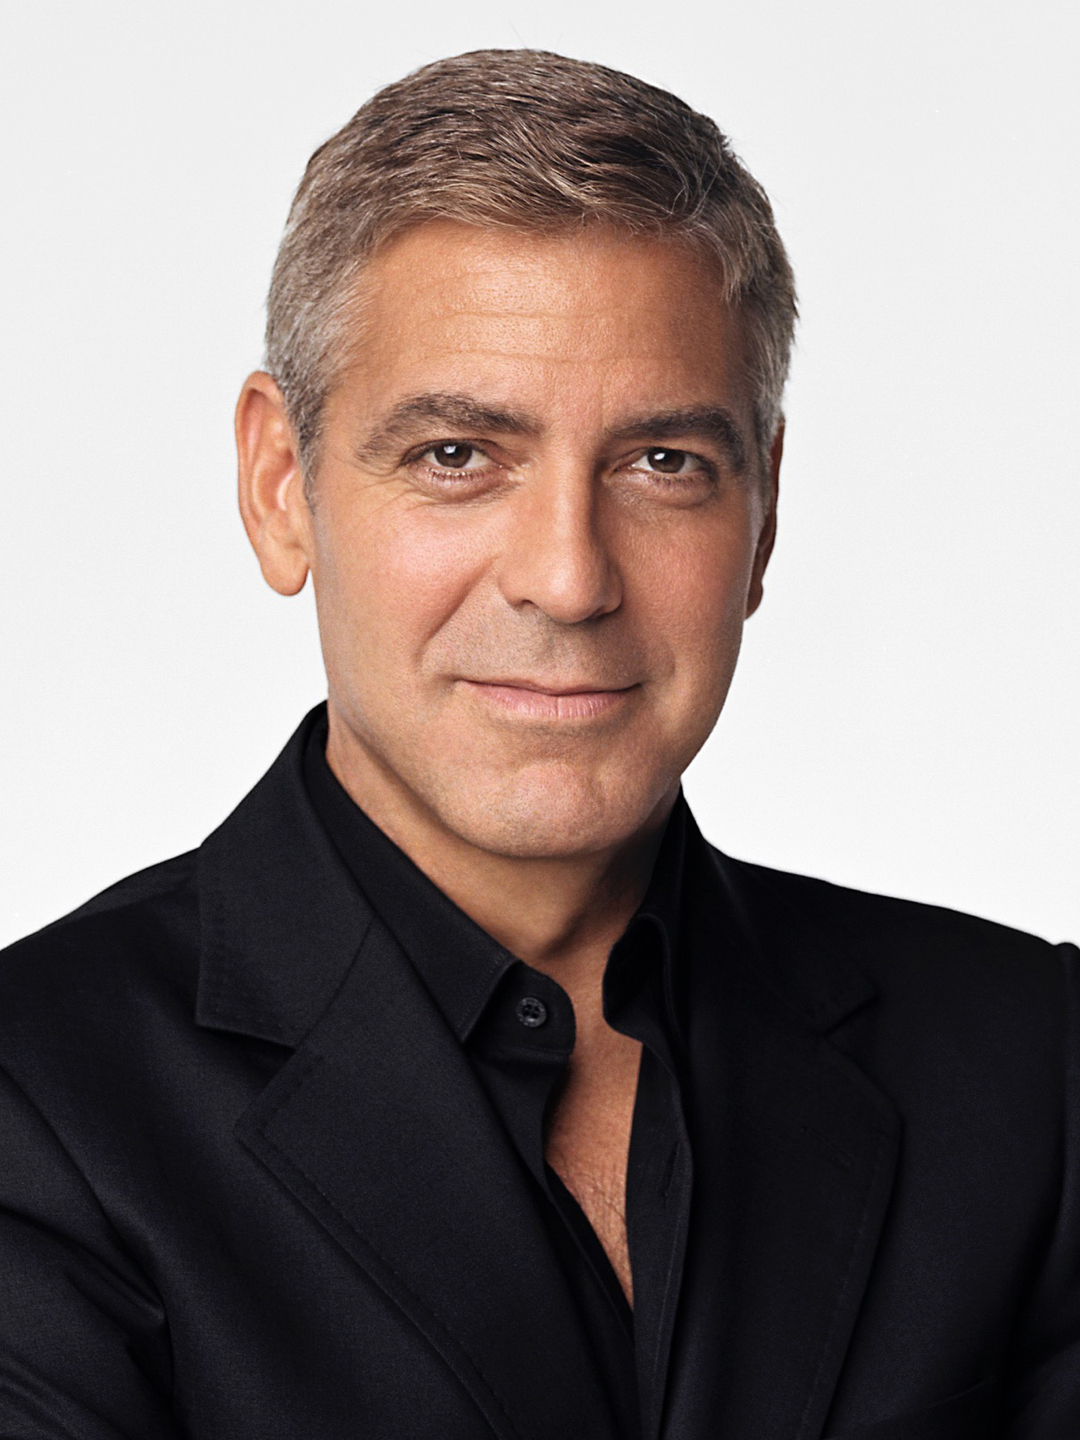 George Clooney how did he became famous